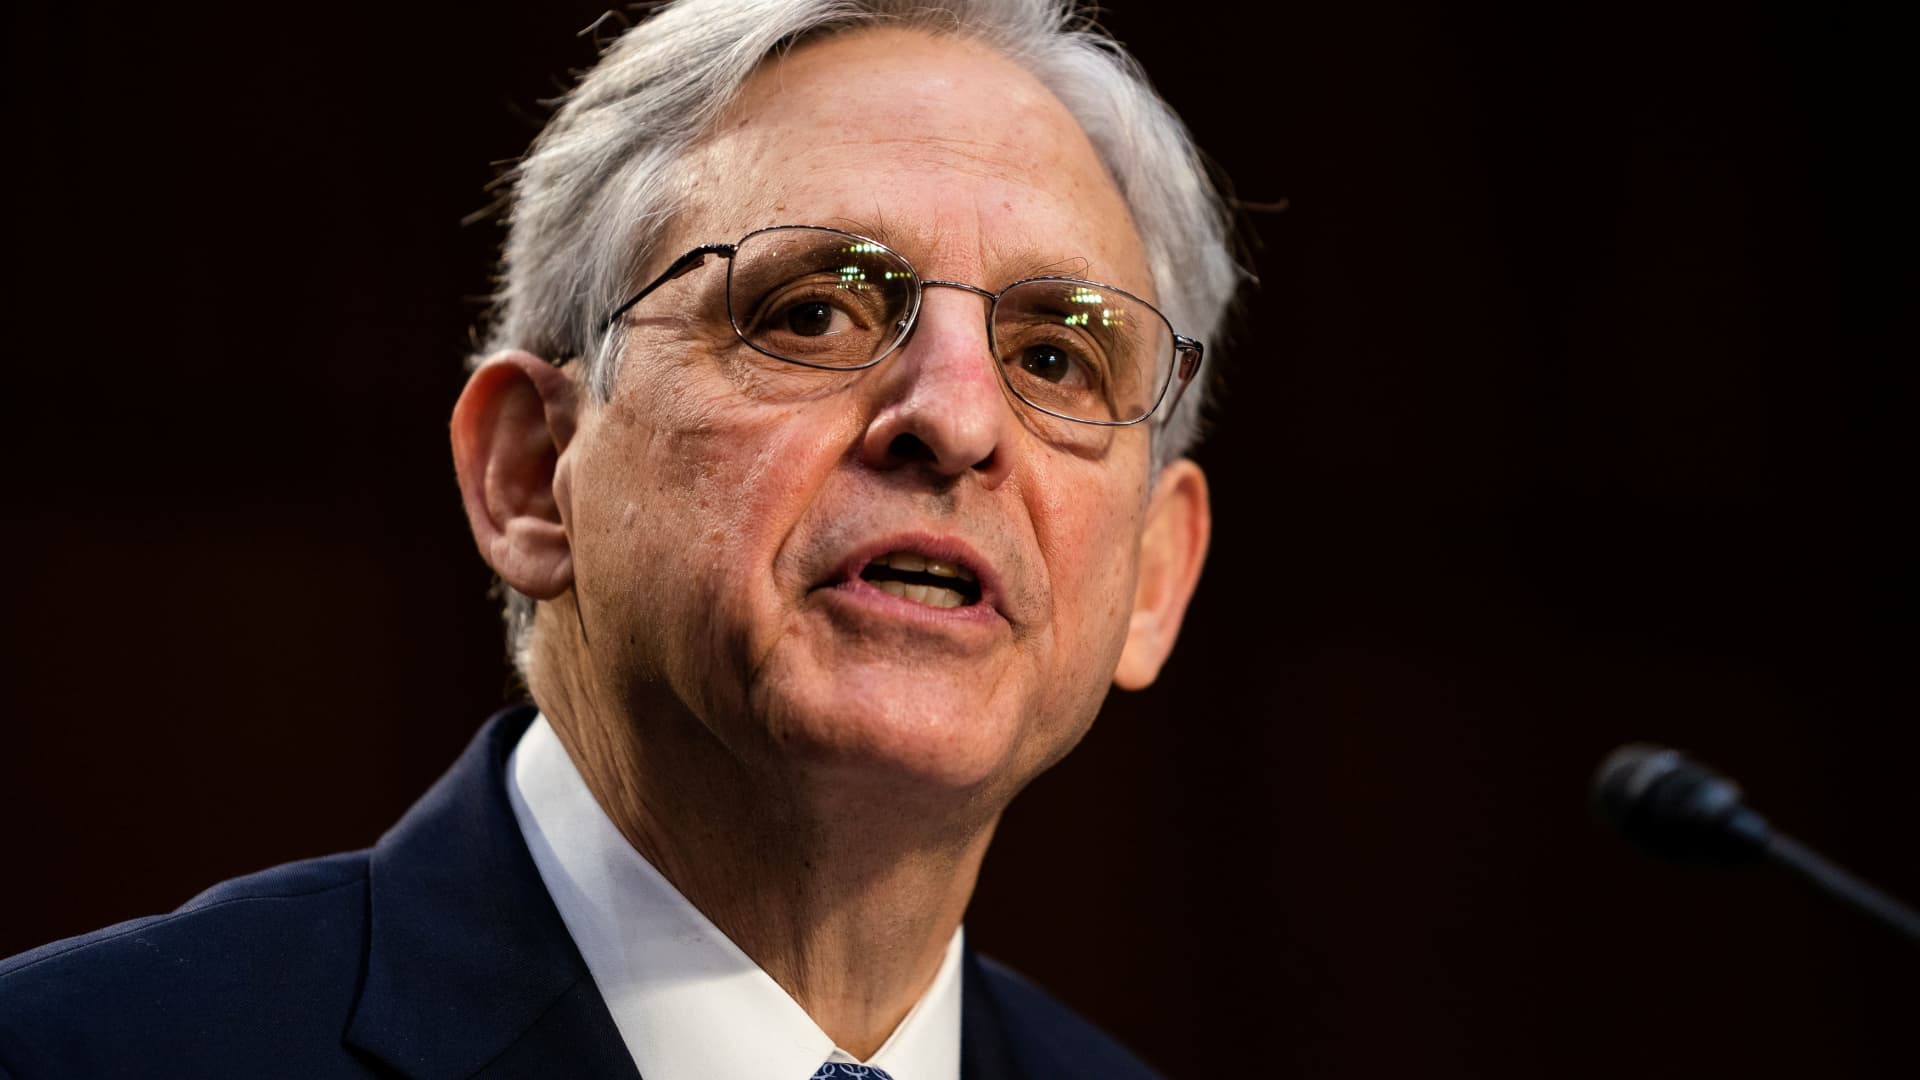 Nominee for U.S. Attorney General, Merrick Garland, during his swearing in confirmation hearing before the Senate Judiciary Committee, Washington, DC, February 22, 2021.